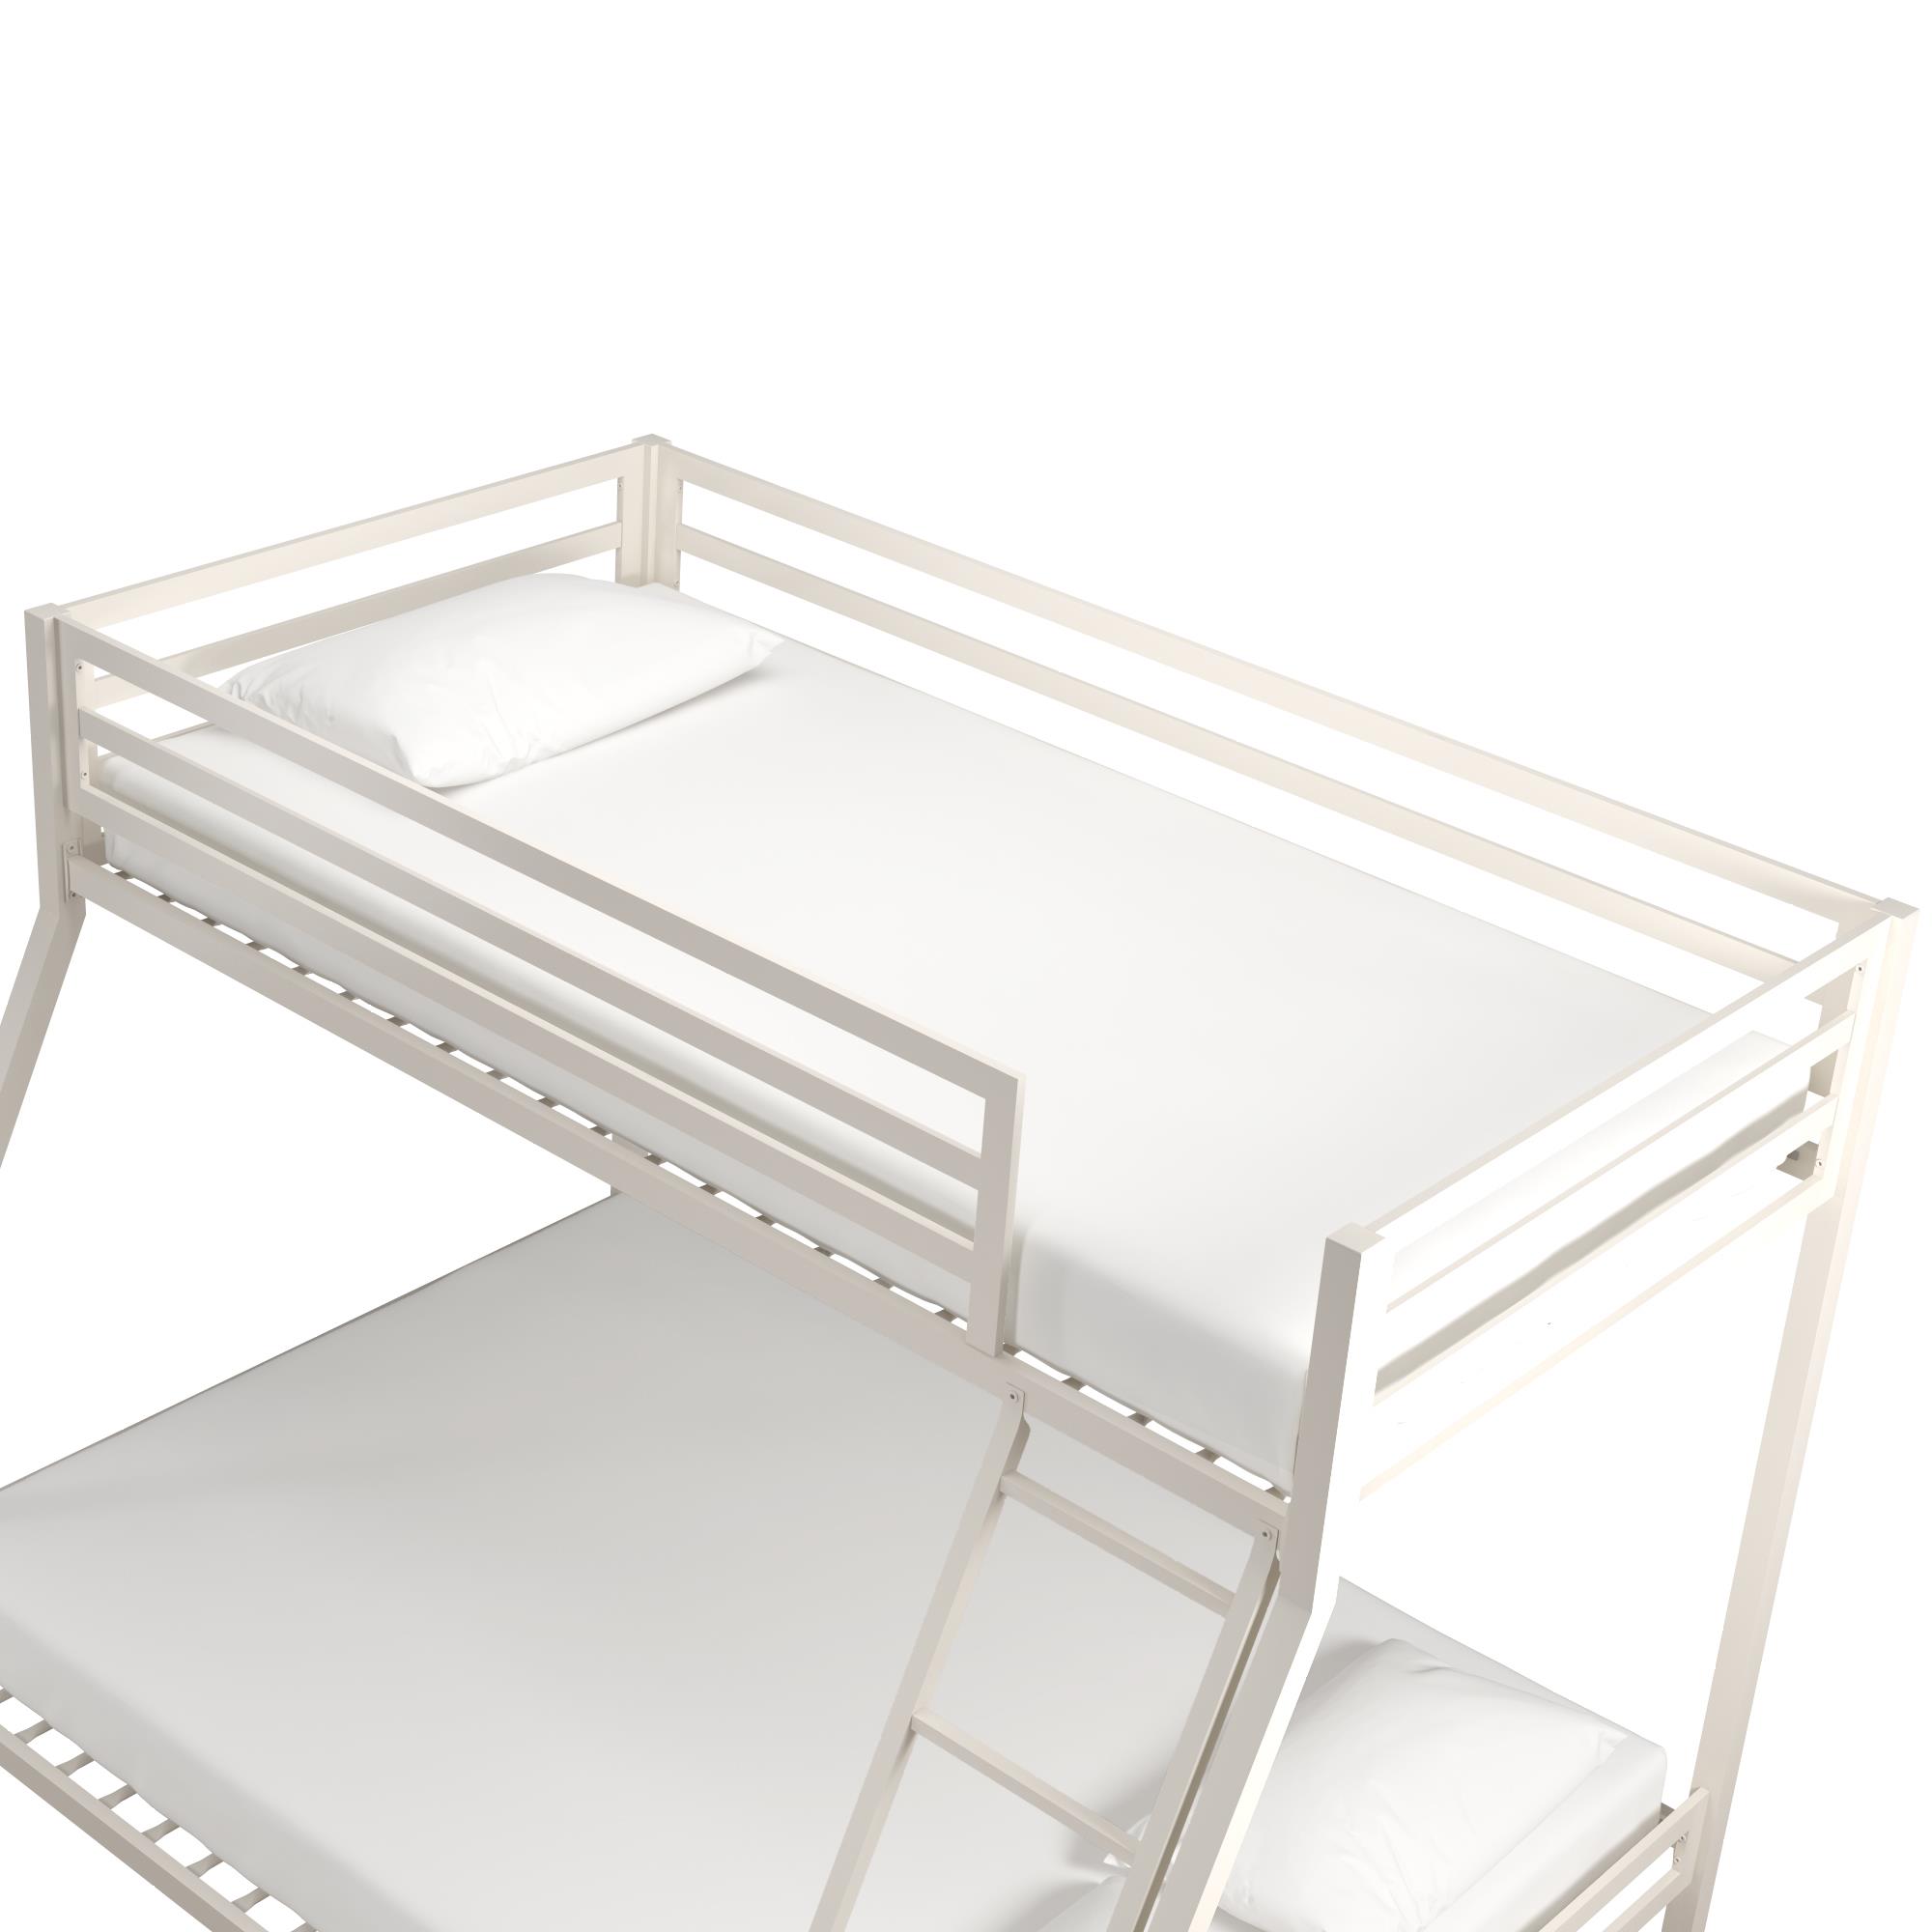 Mainstays Premium Twin over Full Metal Bunk Bed, Off White - image 6 of 13